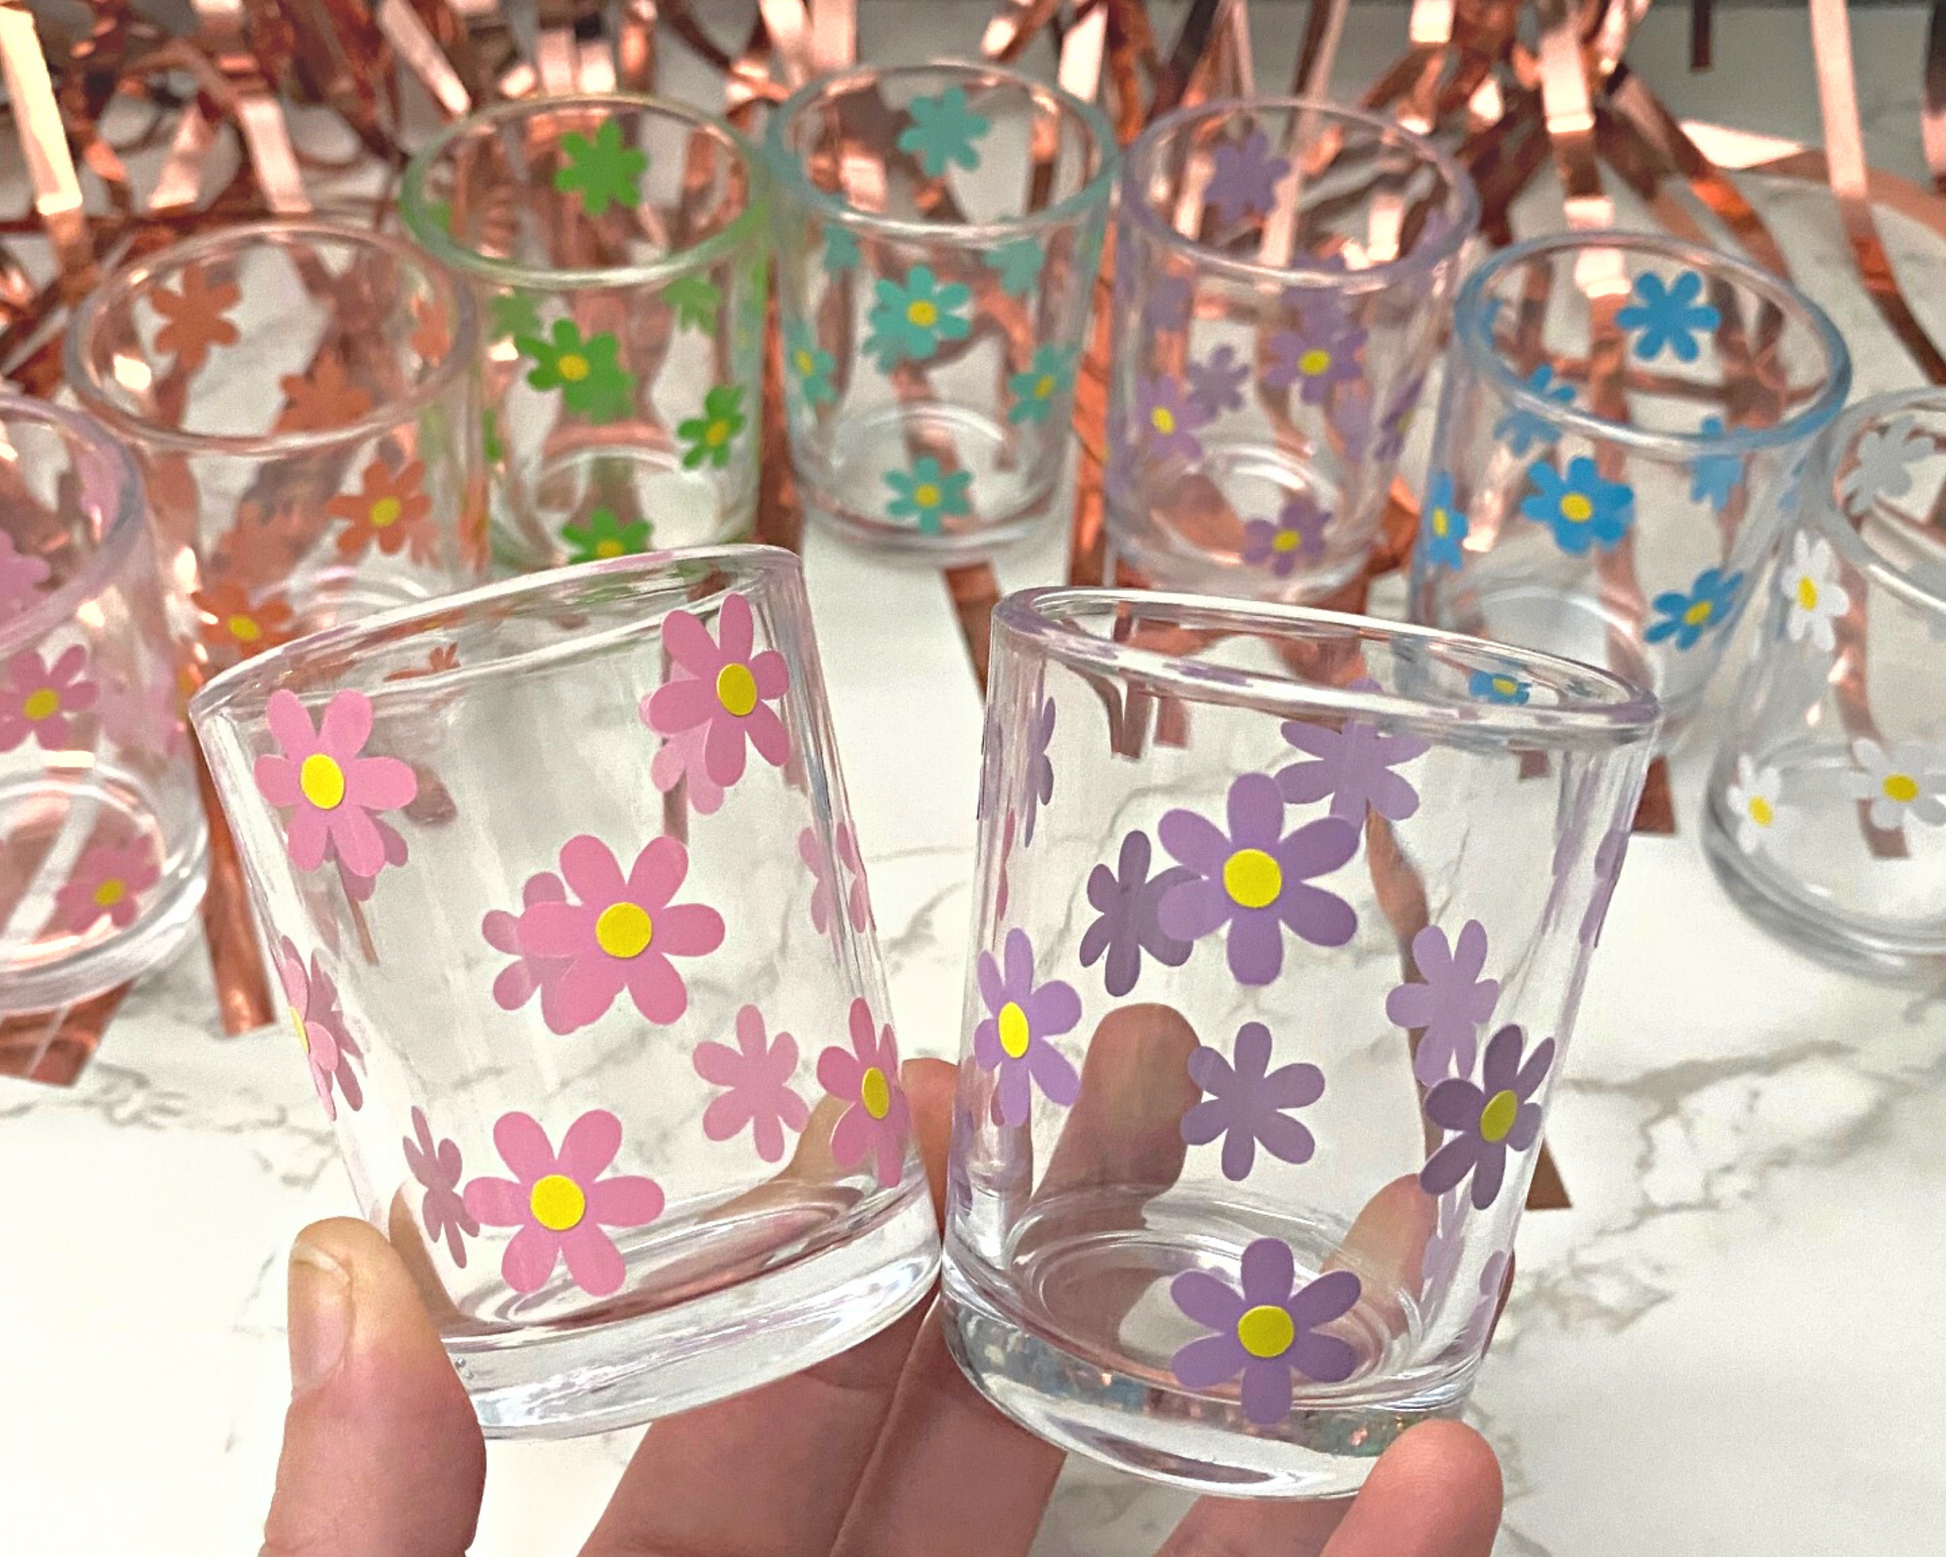 2 shot glasses in someones hand with a daisy flower design on it in pink and white with yellow dots in the middle, fun party background